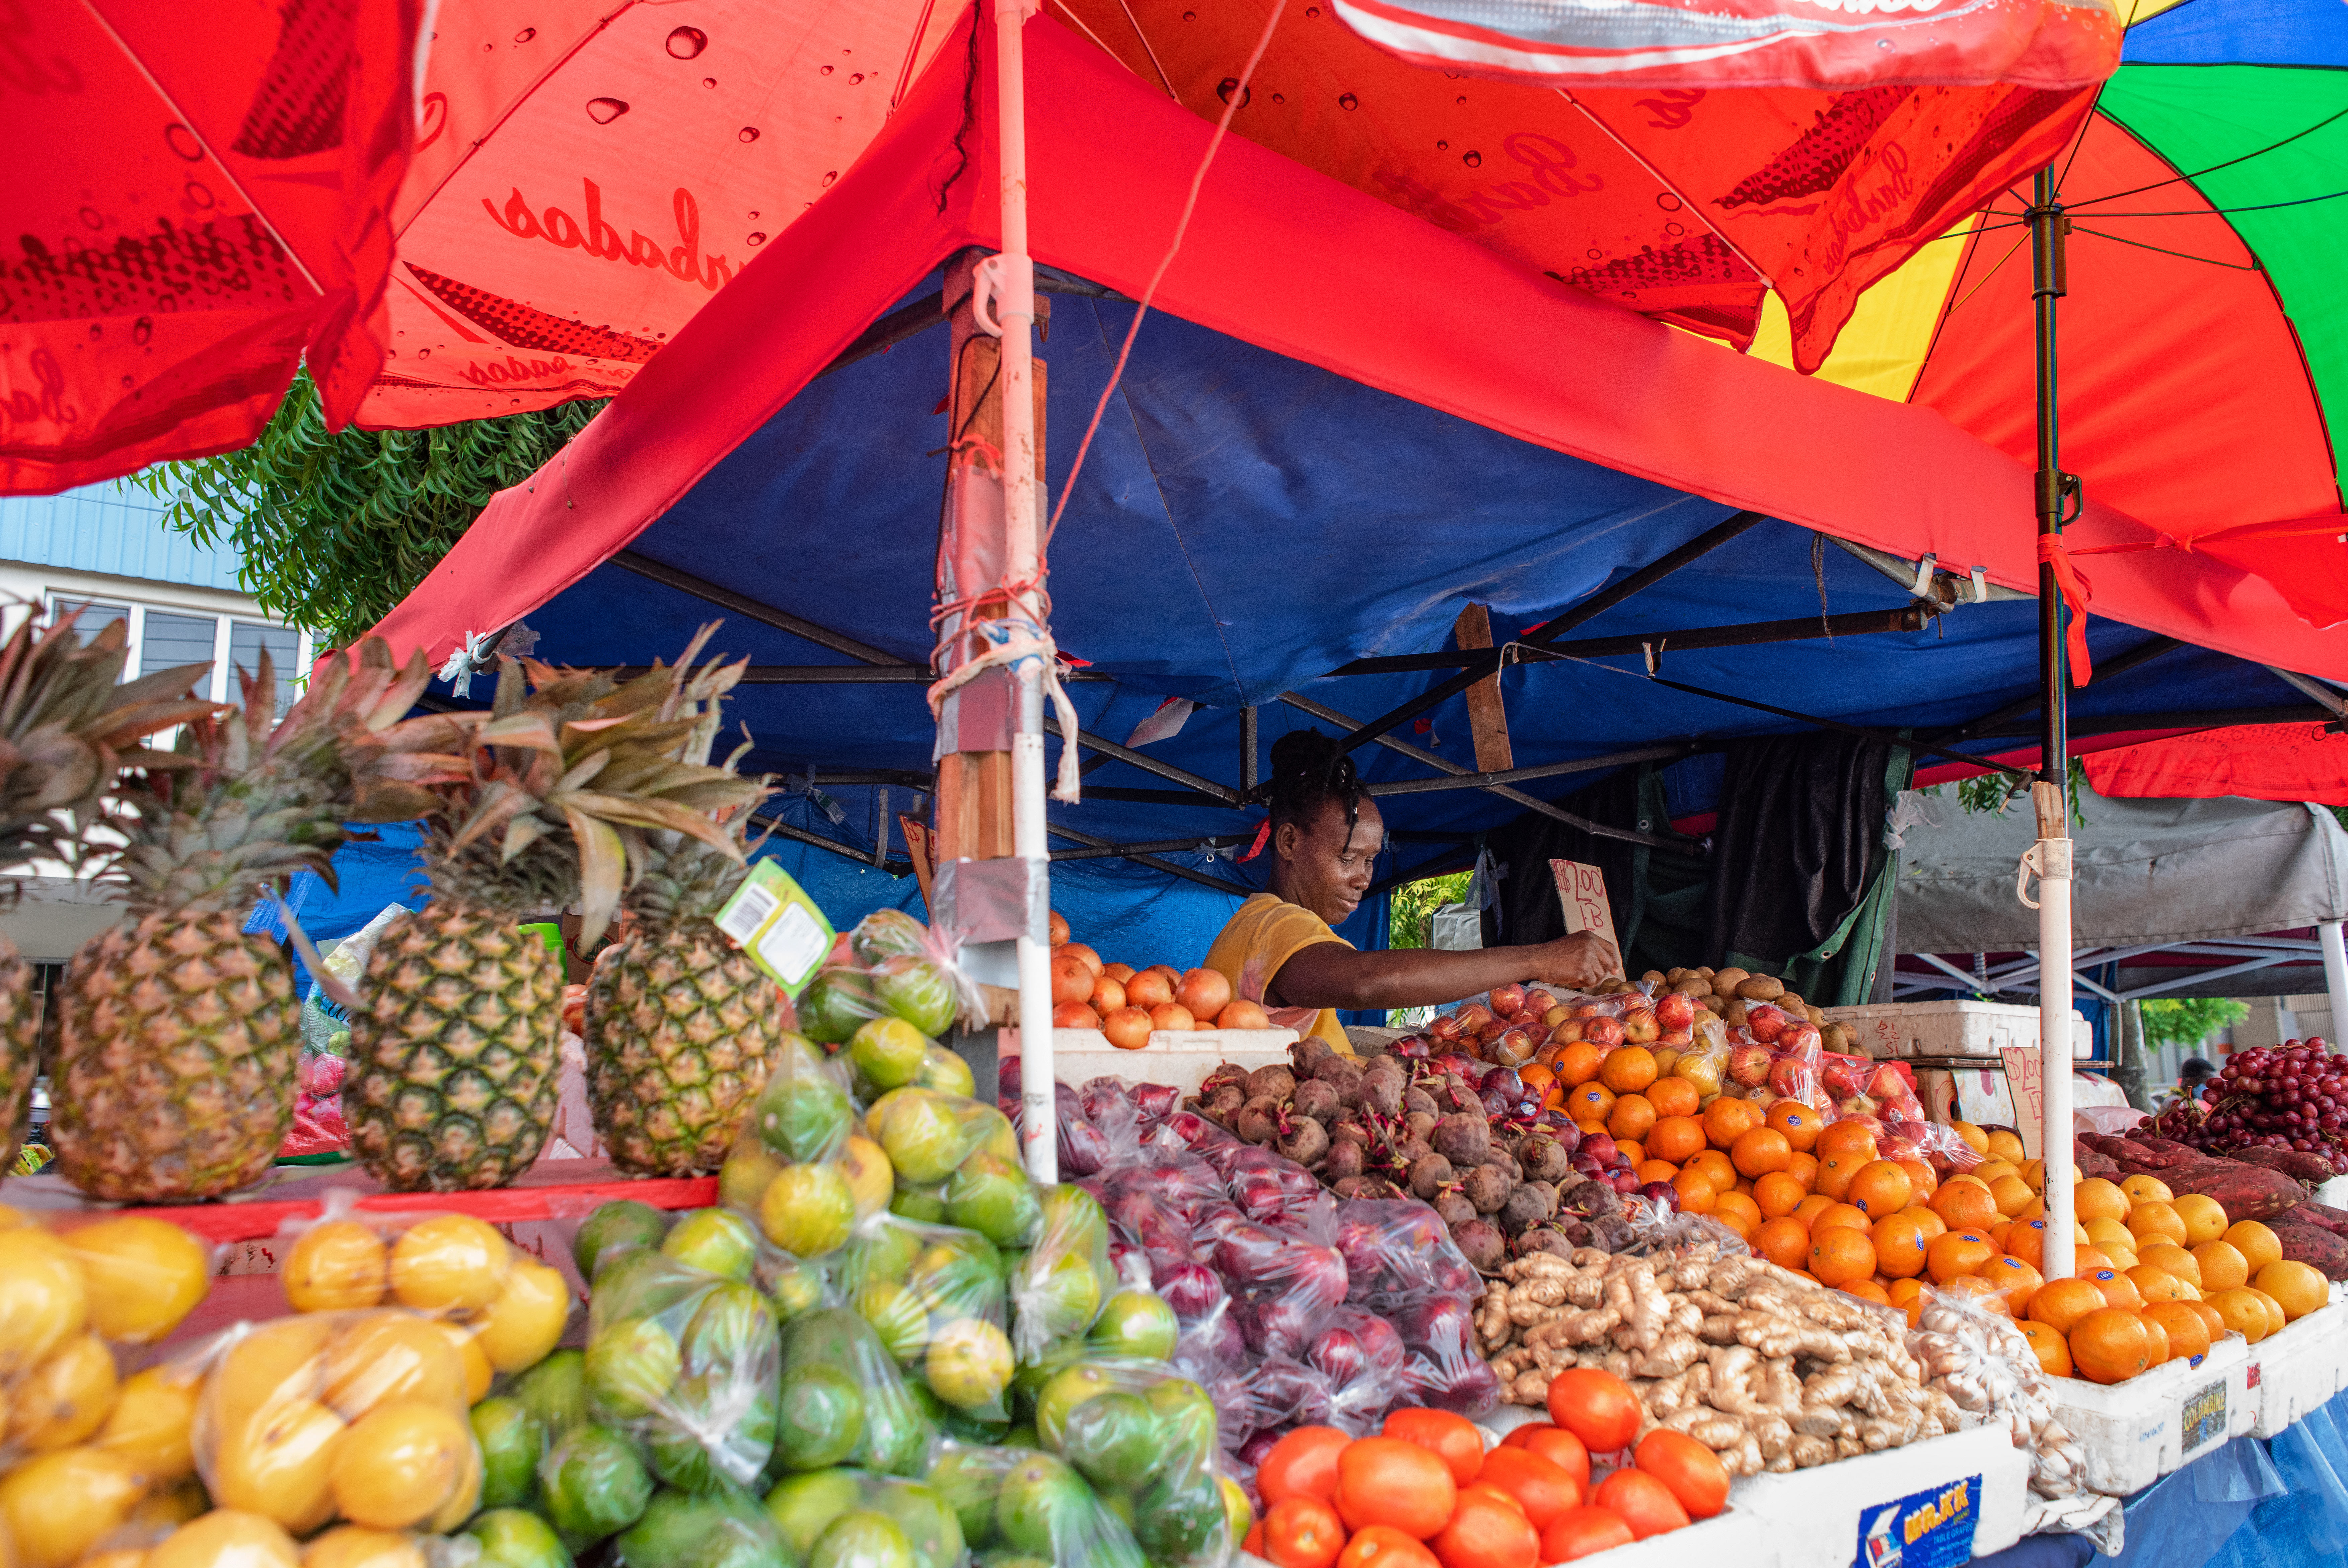 A fruit stall in Barbados